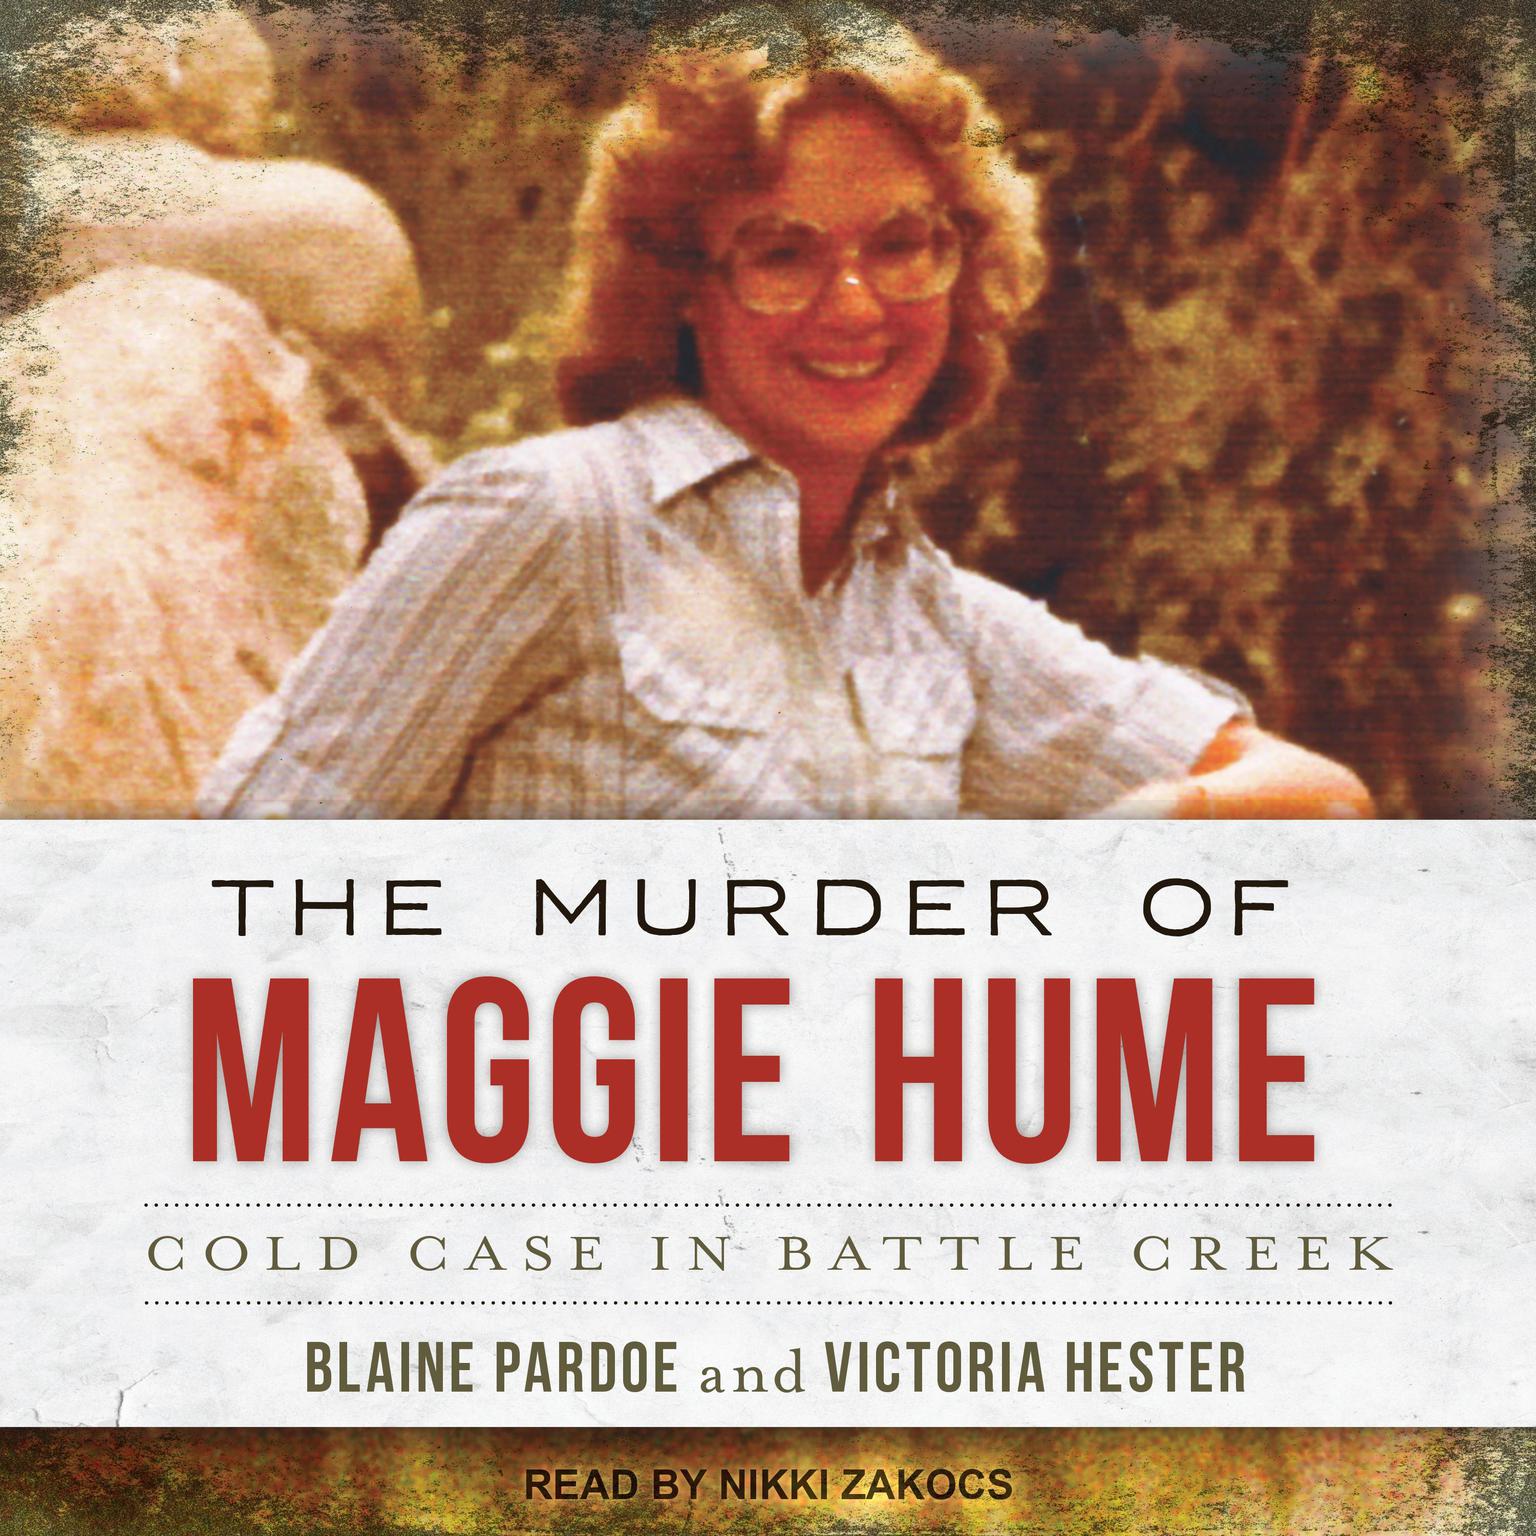 The Murder of Maggie Hume: Cold Case in Battle Creek Audiobook, by Blaine L. Pardoe